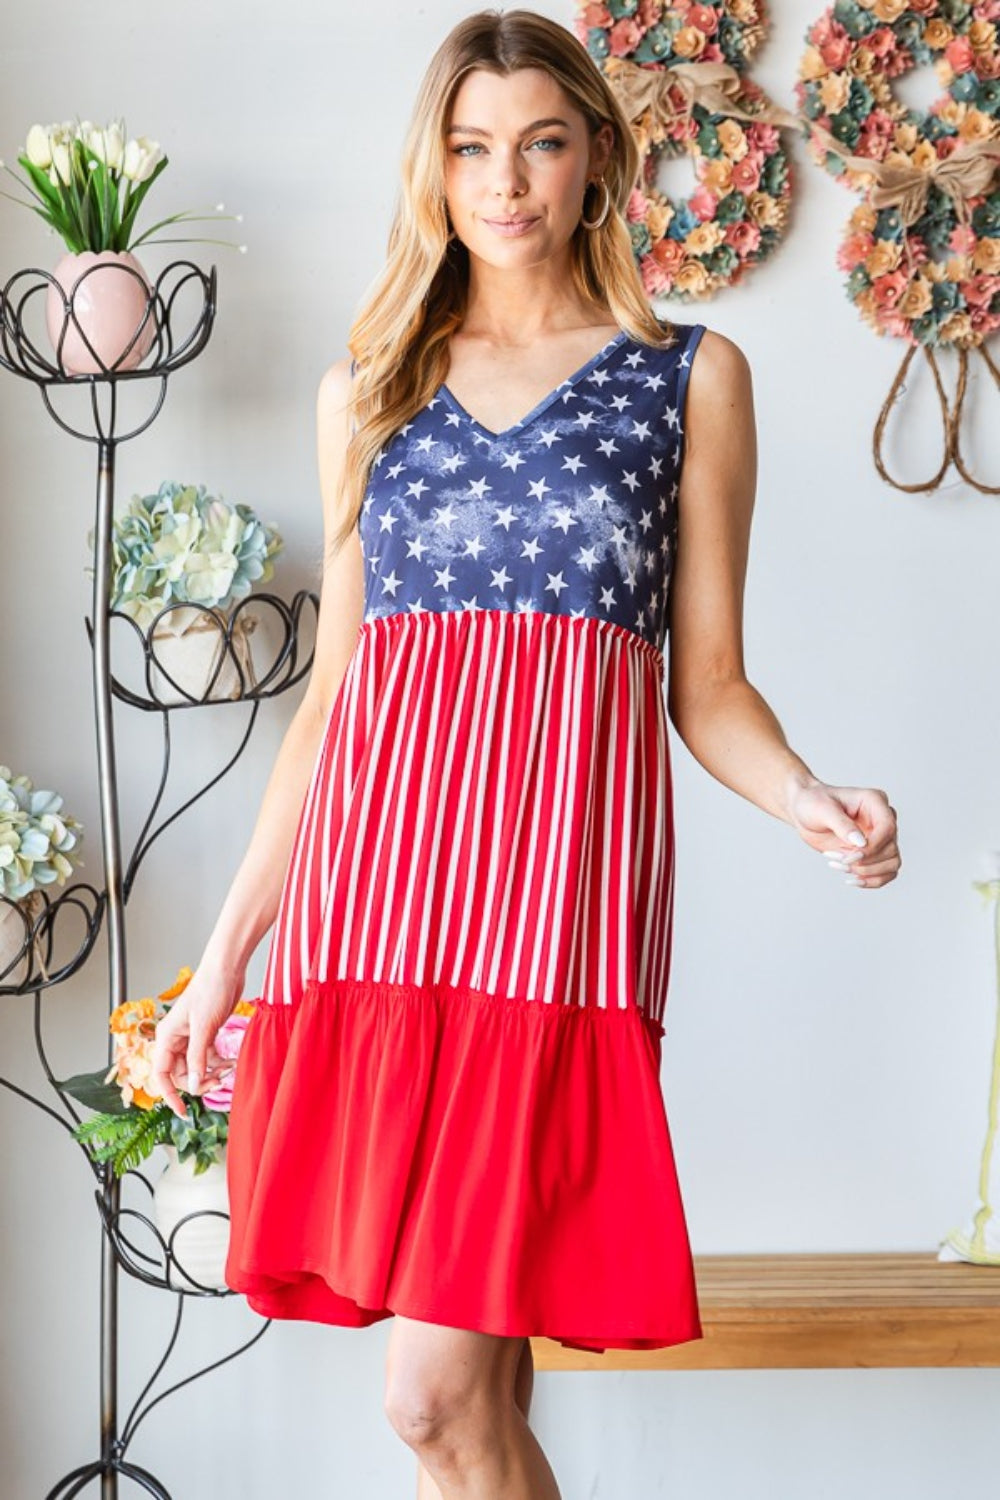 Heimish Full Size US Flag Theme Contrast Tank Dress free shipping -Oh Em Gee Boutique